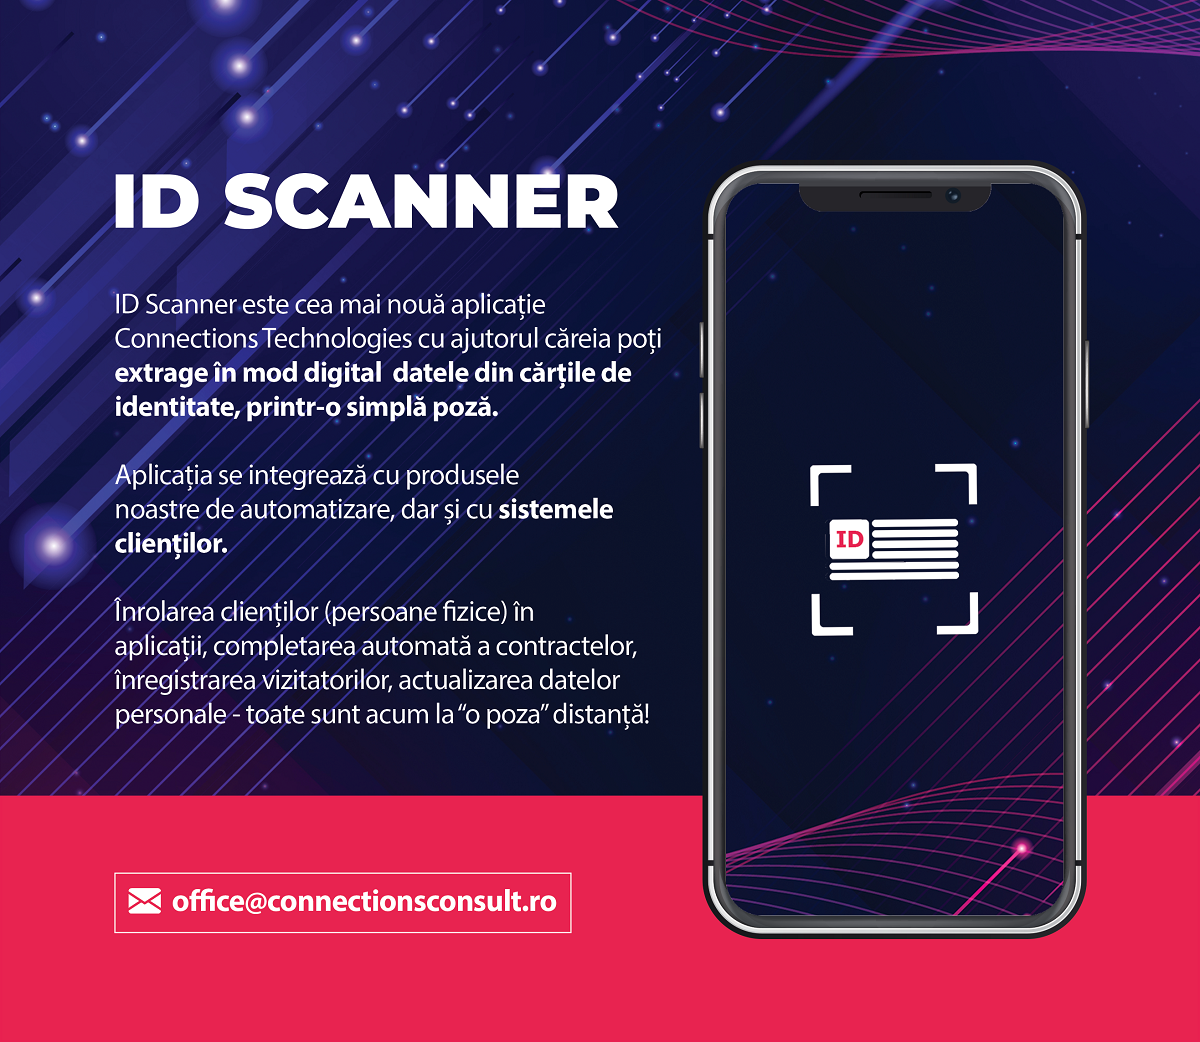 ID Scanner: Over 10,000 working hours saved by the ID card data scanning application